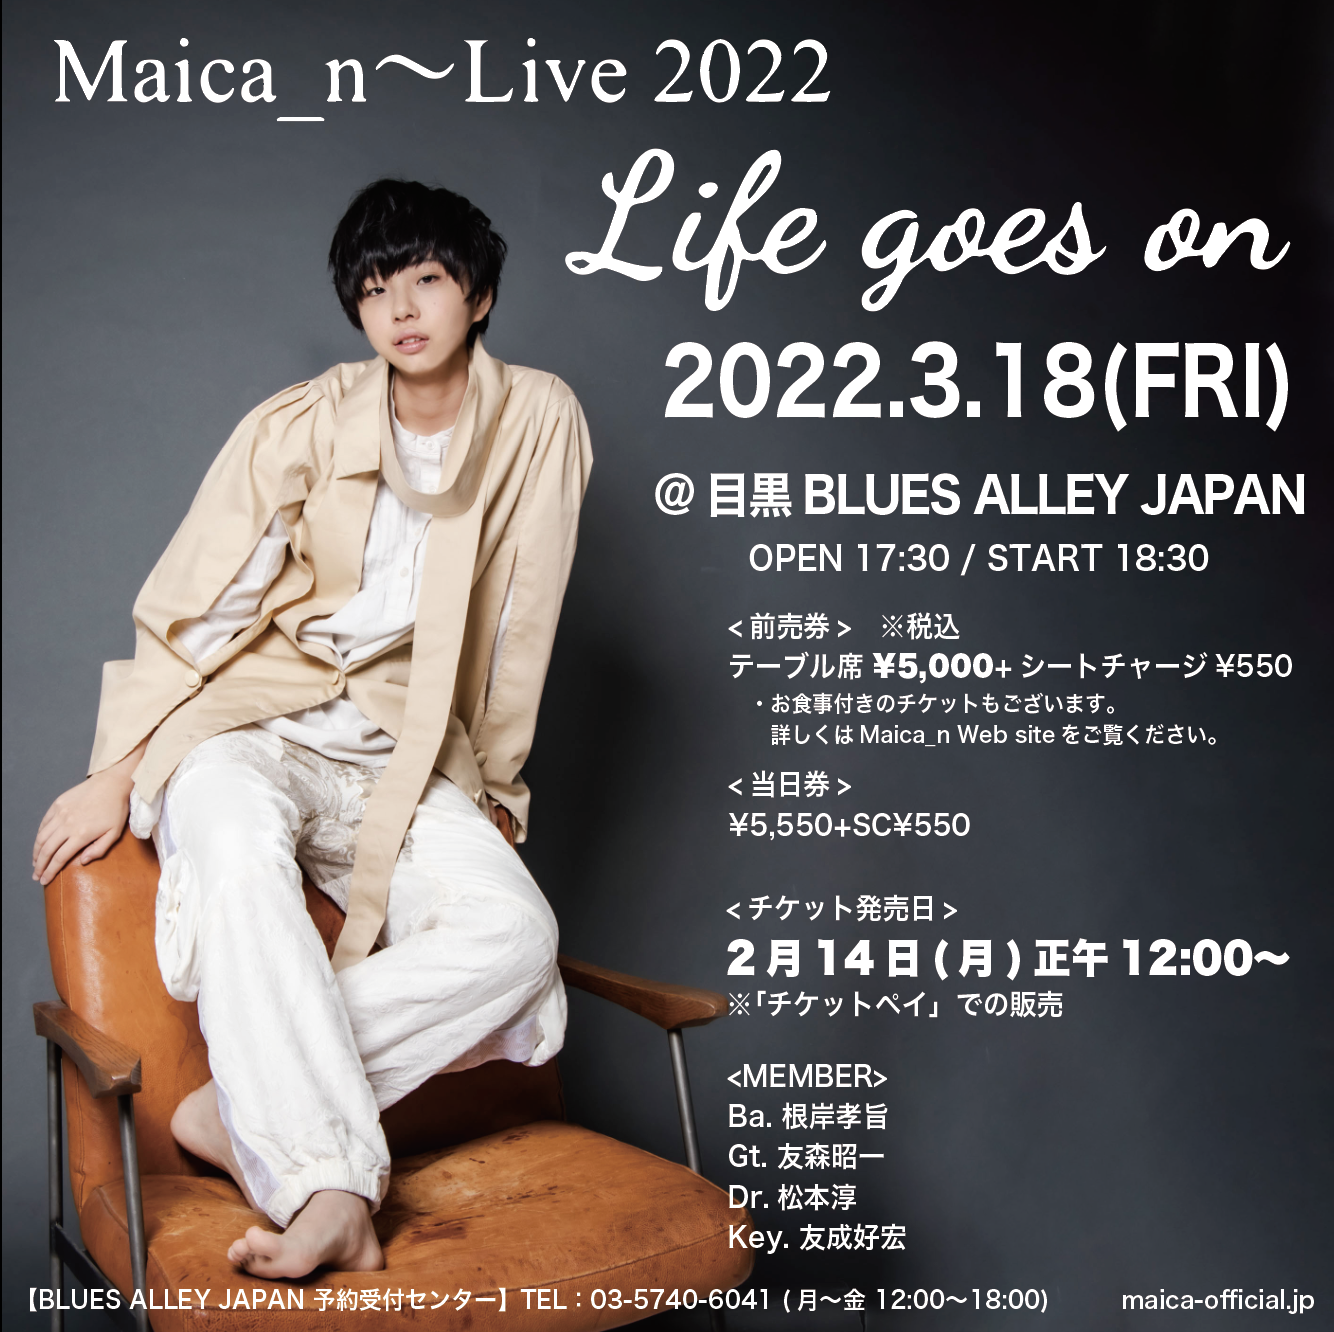 「Maica_n〜Live 2022 Life goes on」